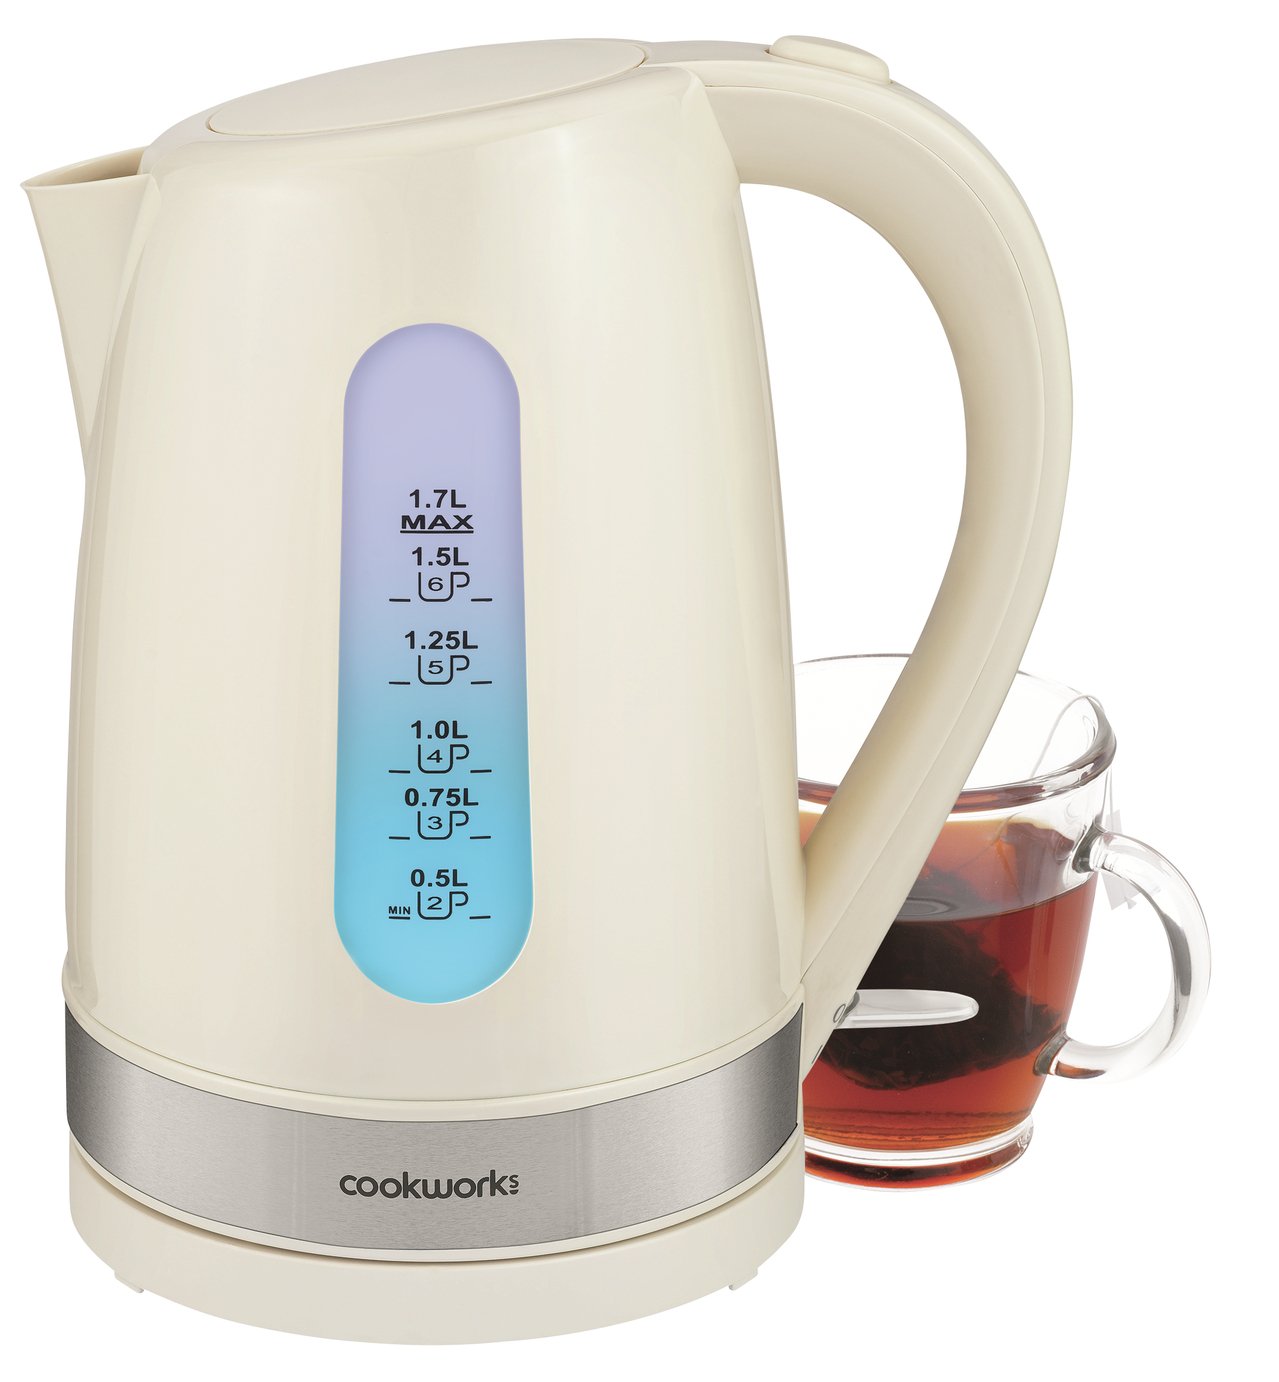 Cookworks Plastic Illuminated Kettle Review